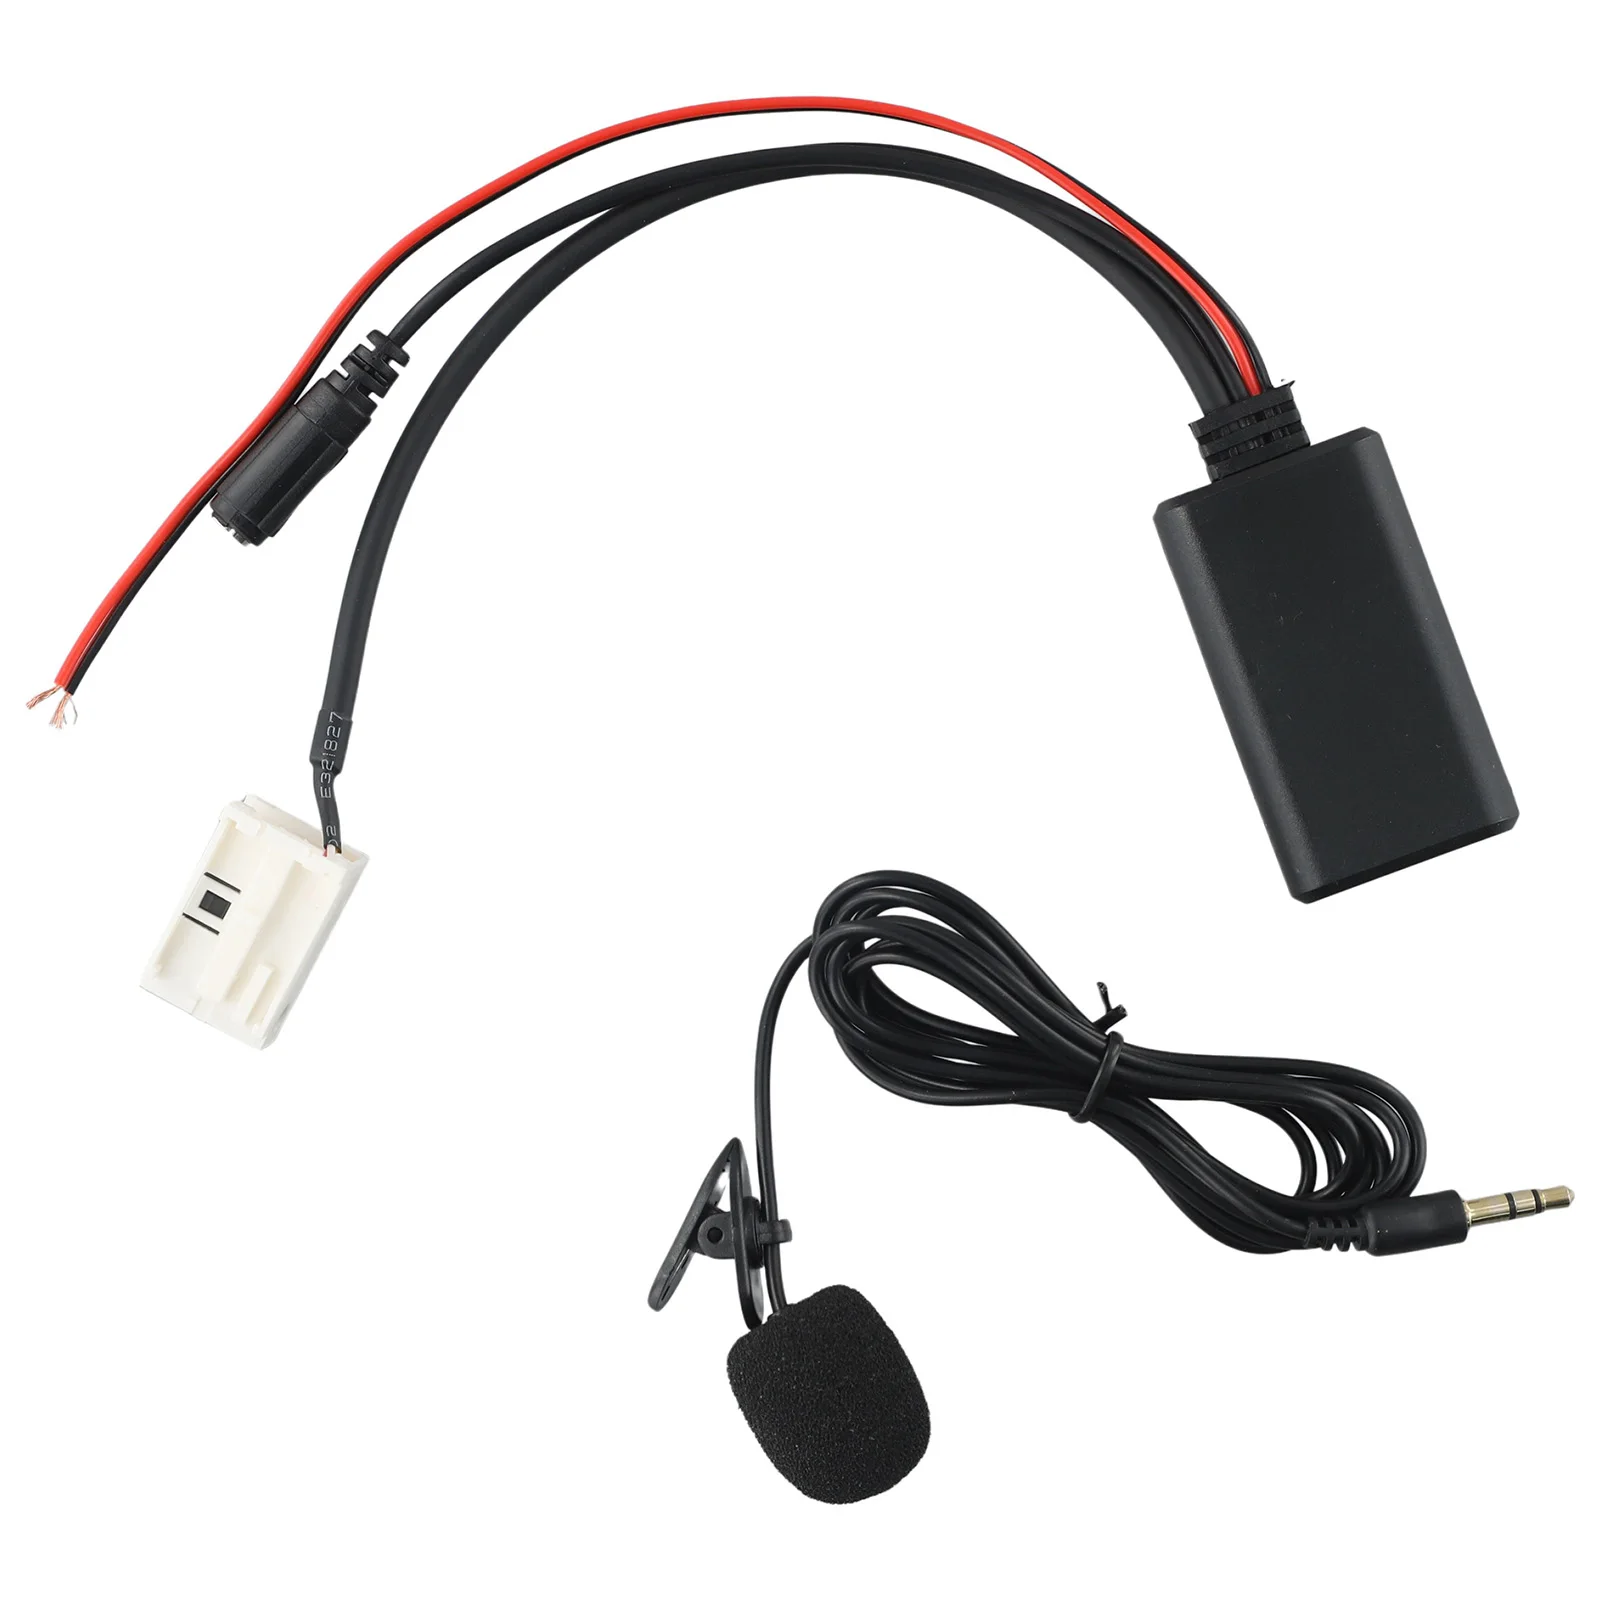 

Car Bluetooth-Compatible AUX Adapter Handsfree Cable Fits For MCD RNS 510 RCD 200 210 300 310 500 RNS MFD2 CD/DVD Auto Parts